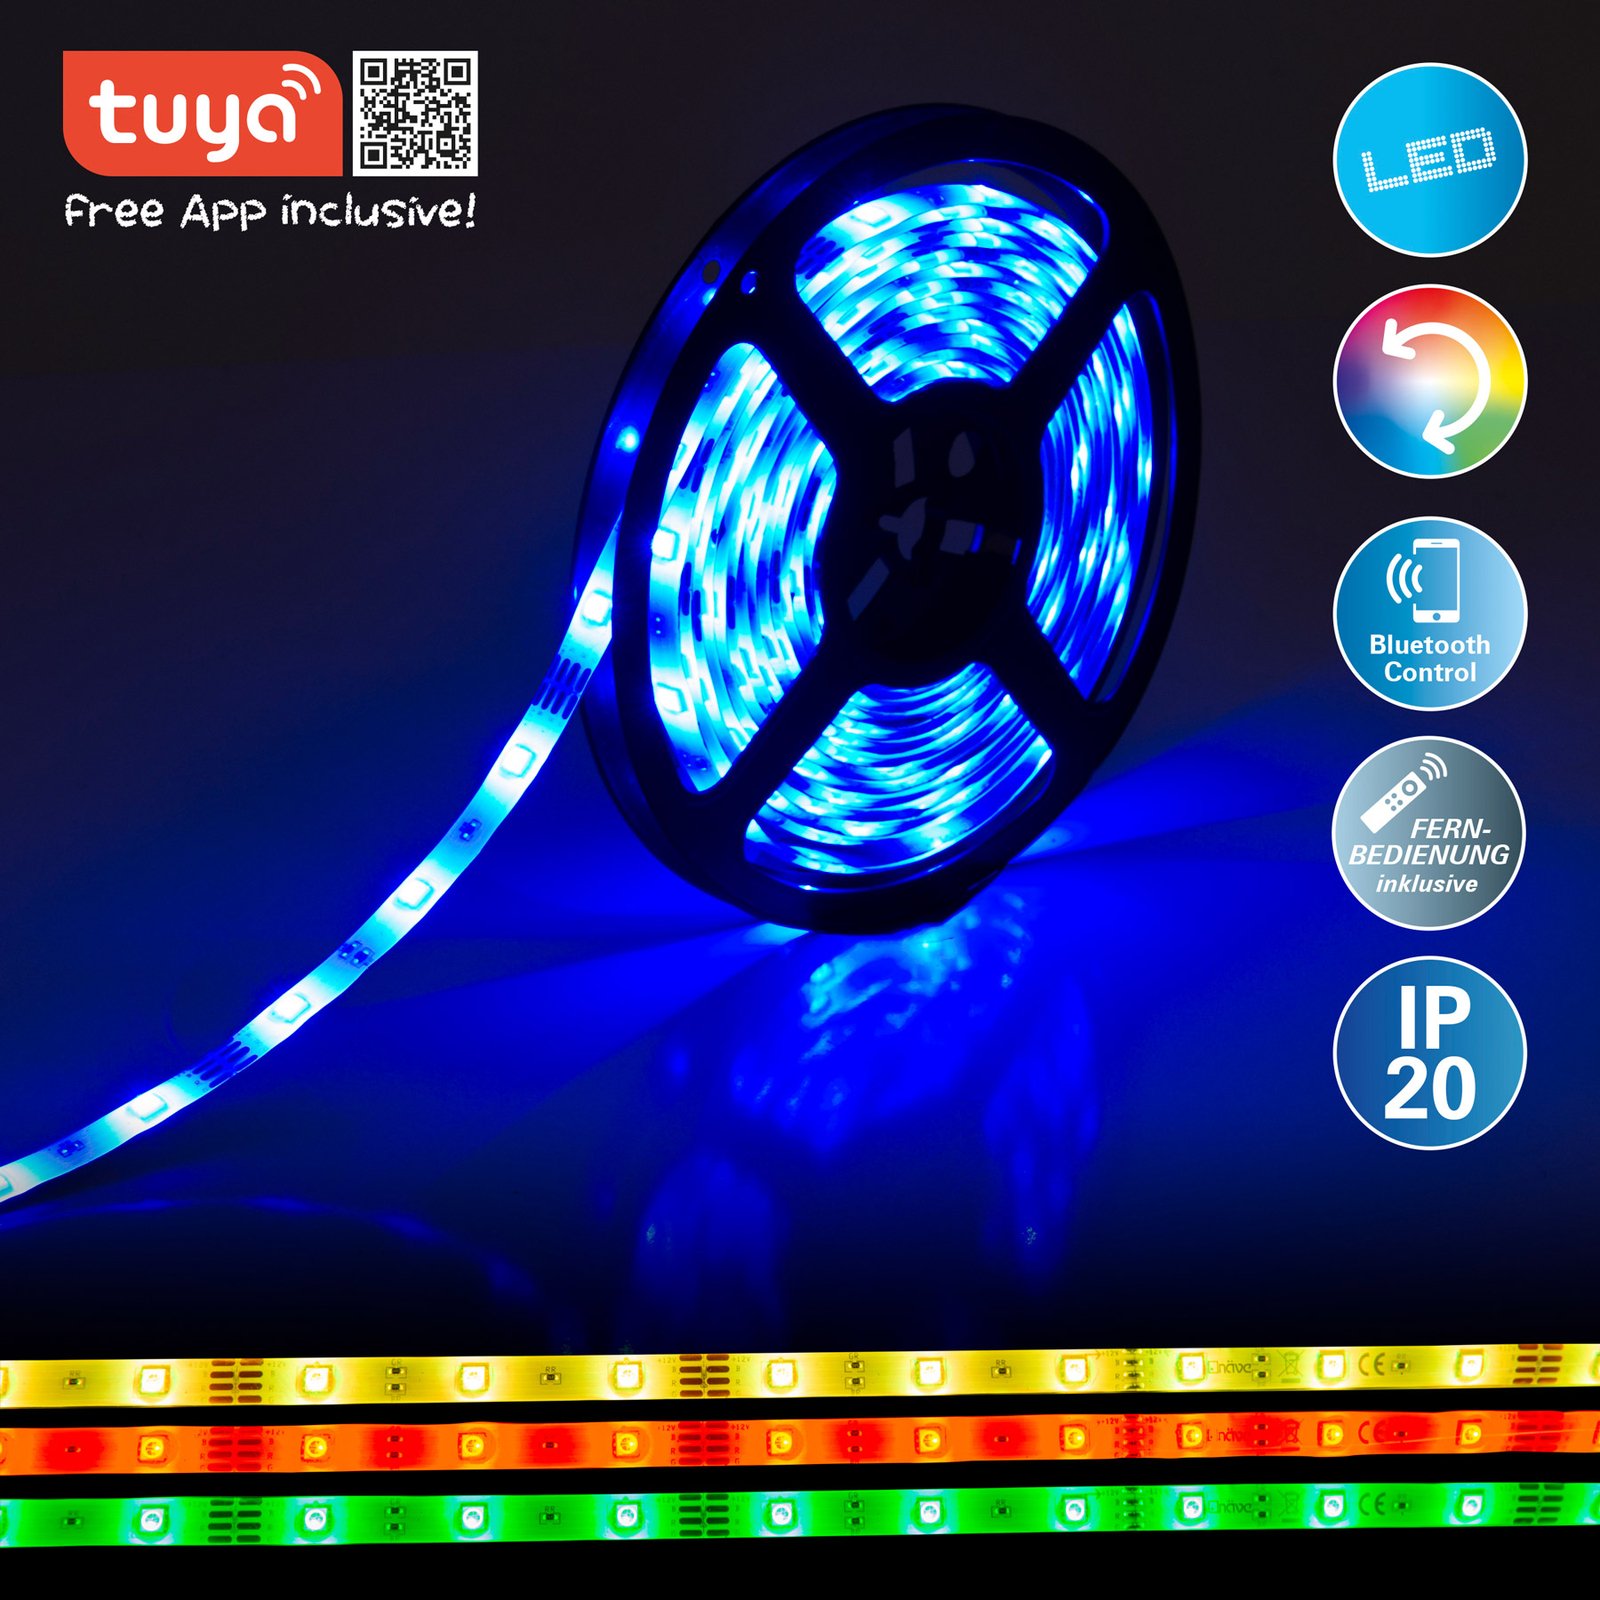 LED RGB strip with remote control, 5 metres long